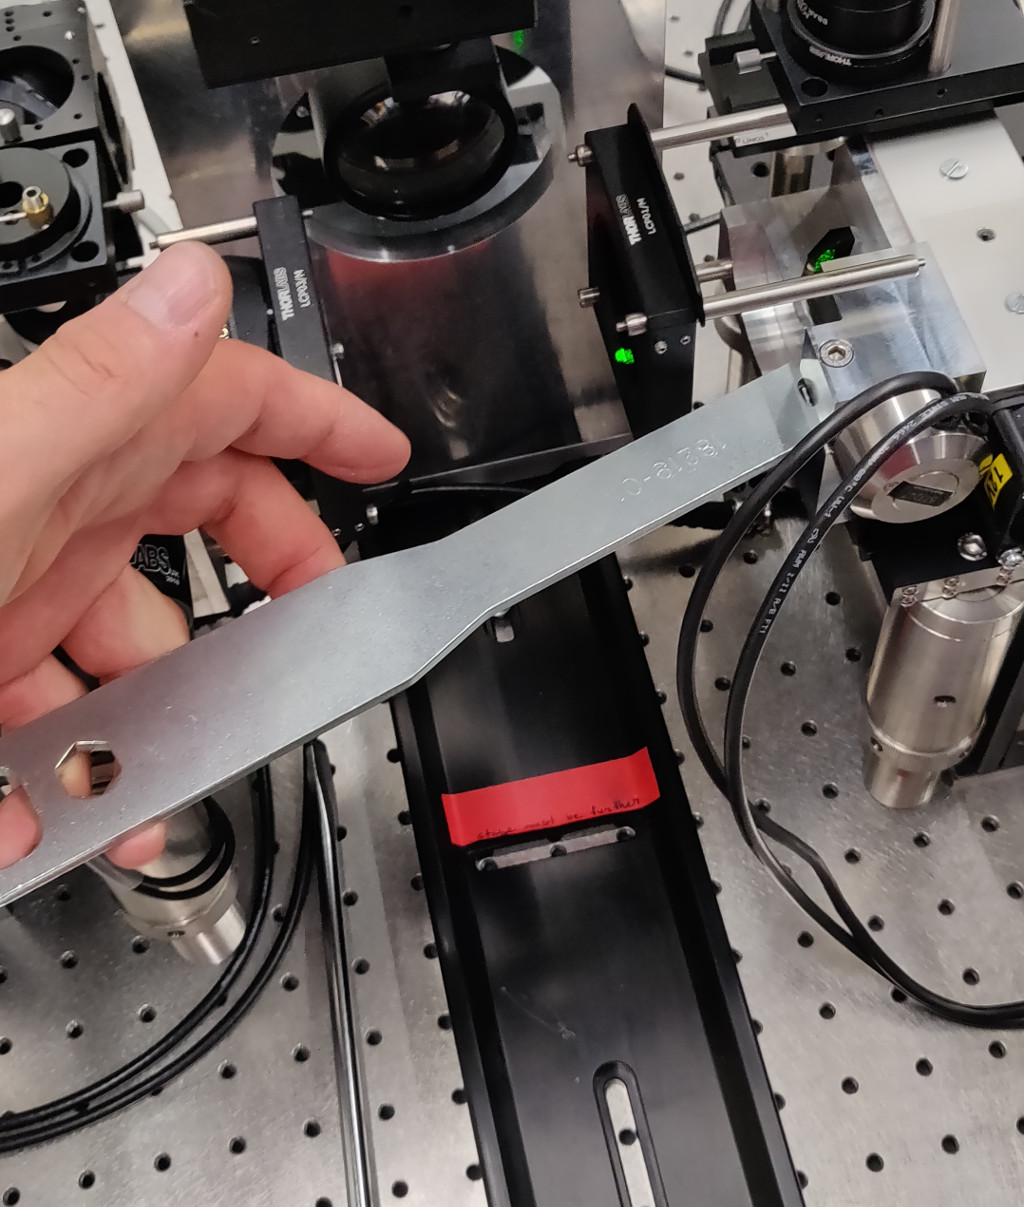 Using a wrench to rotate the scanner